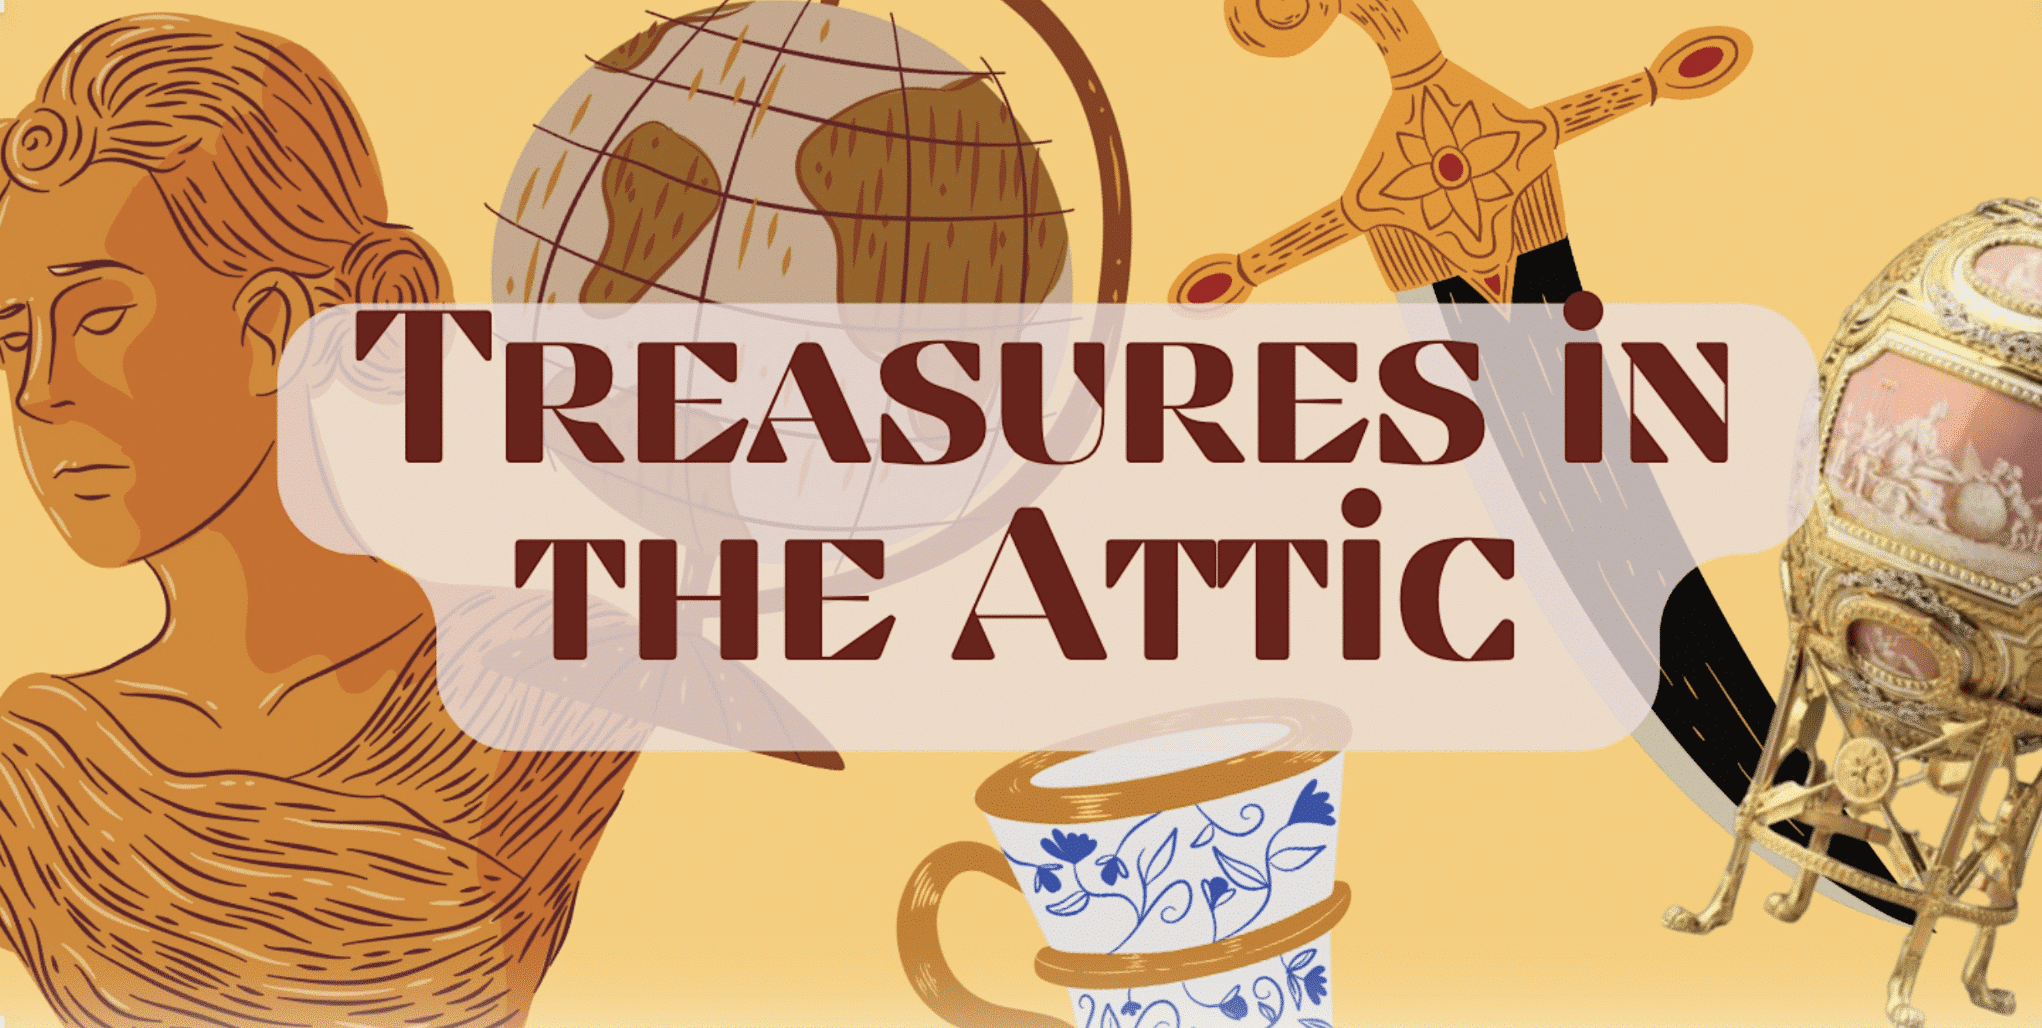 A golden yellow background with Drawings of antique globe, bust, sword, tea cup, and others behind the words "Treasures in the Attic"